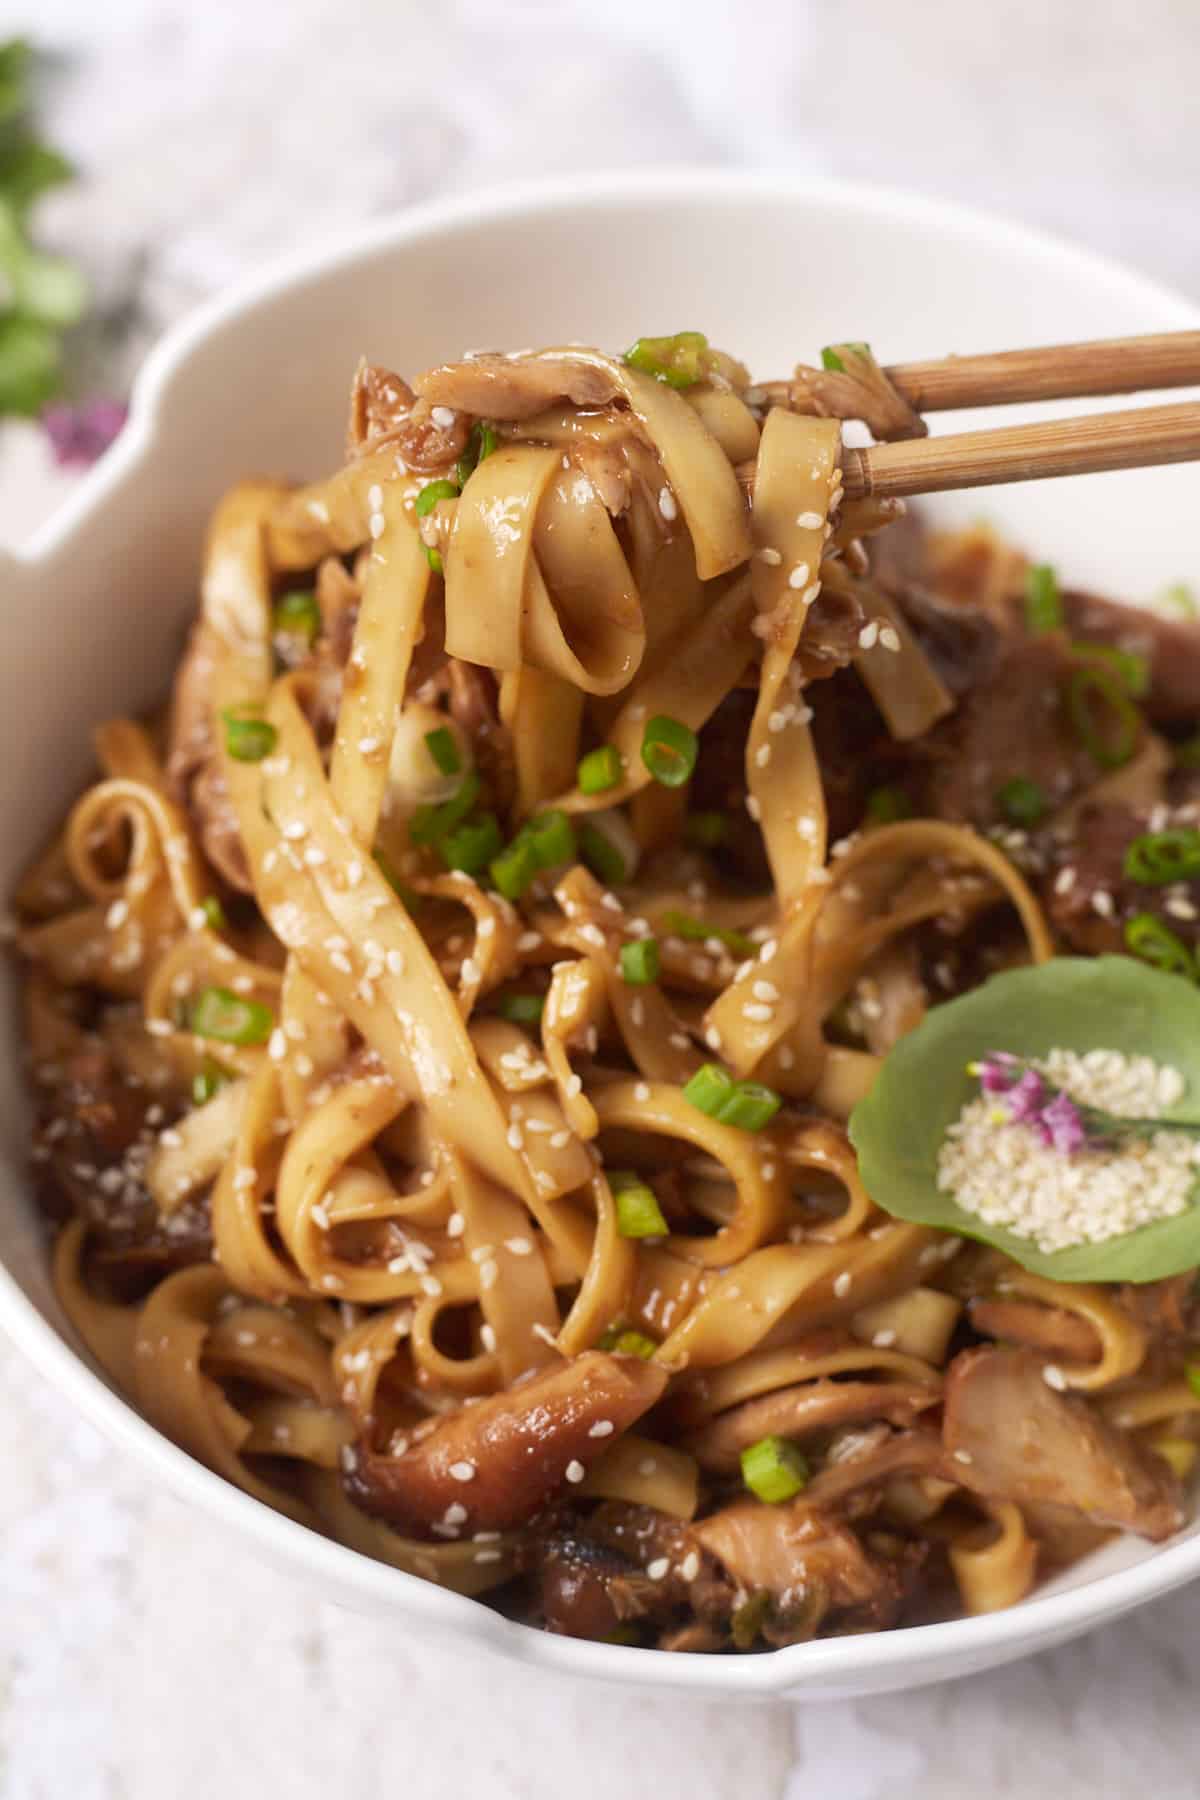 Chopsticks holding a bite of lo mein noodles and chicken in a honey garlic sauce